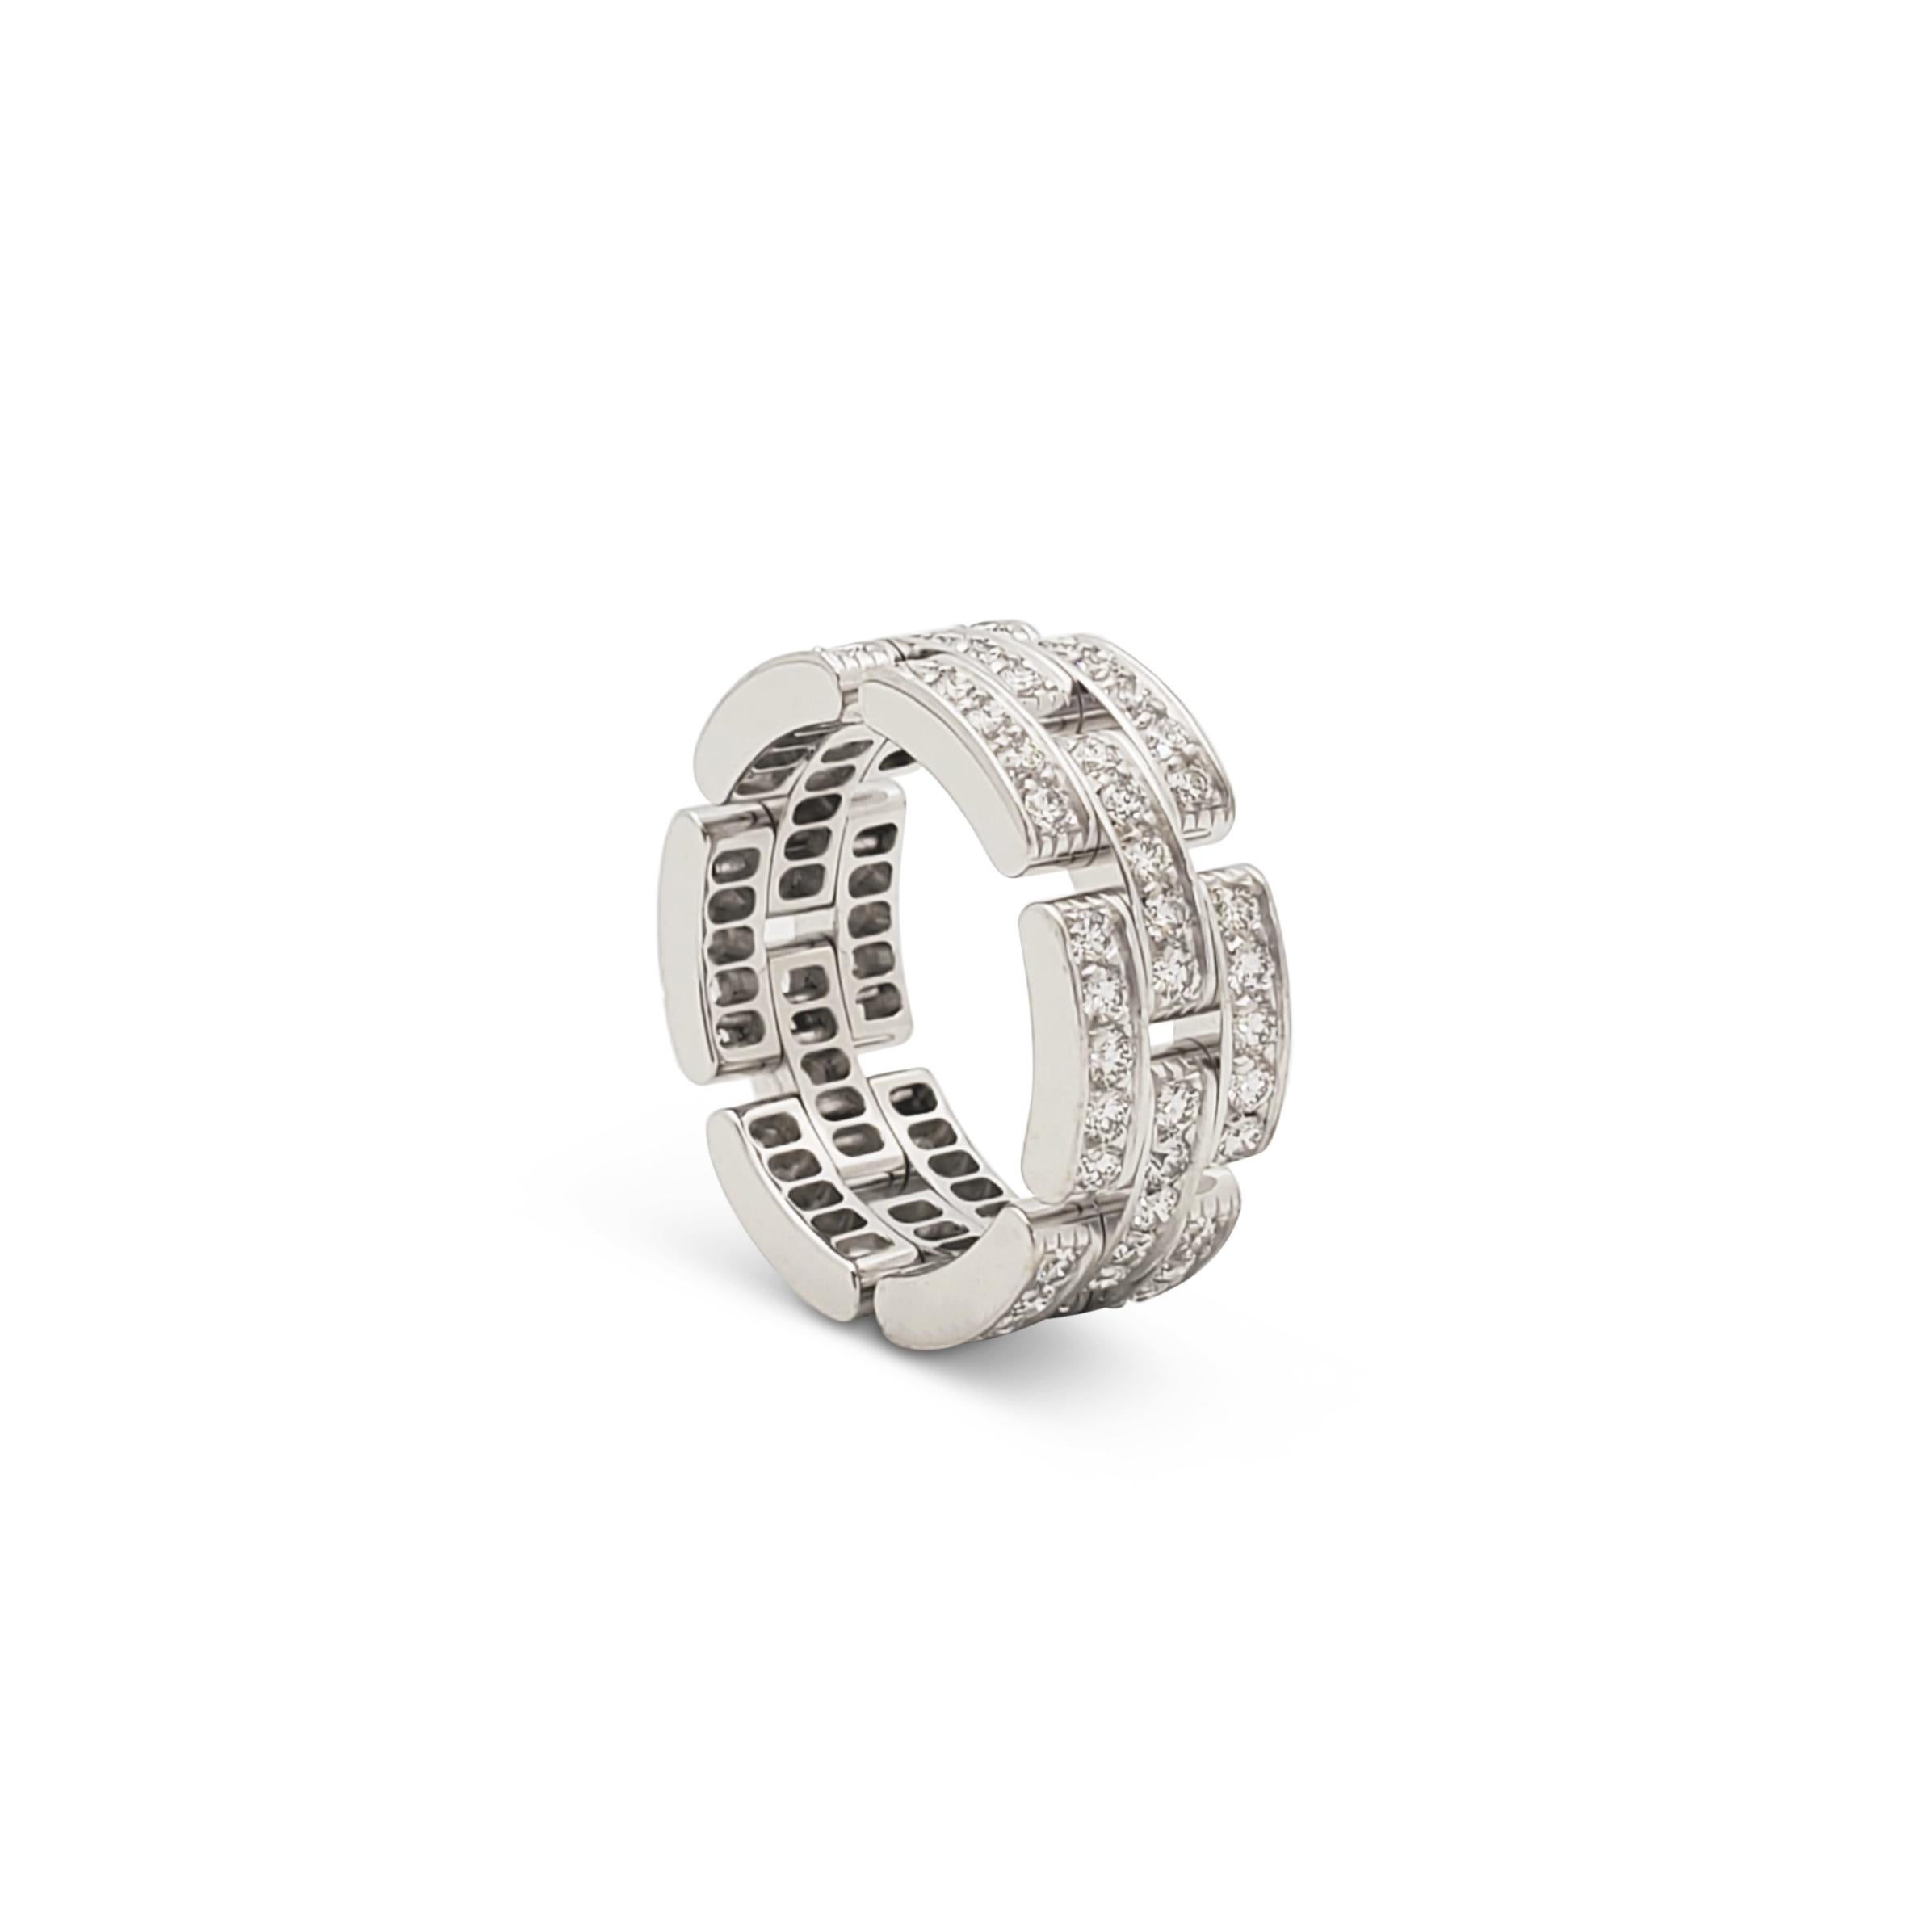 Authentic Cartier Maillon Panthère ring crafted in 18 karat white gold.  Comprised of 3 rows and set with sparkling round brilliant cut diamonds of approximately 1.37 carats total weight.  Size 52, US 6.  Signed Cartier, 52, 750, with serial number